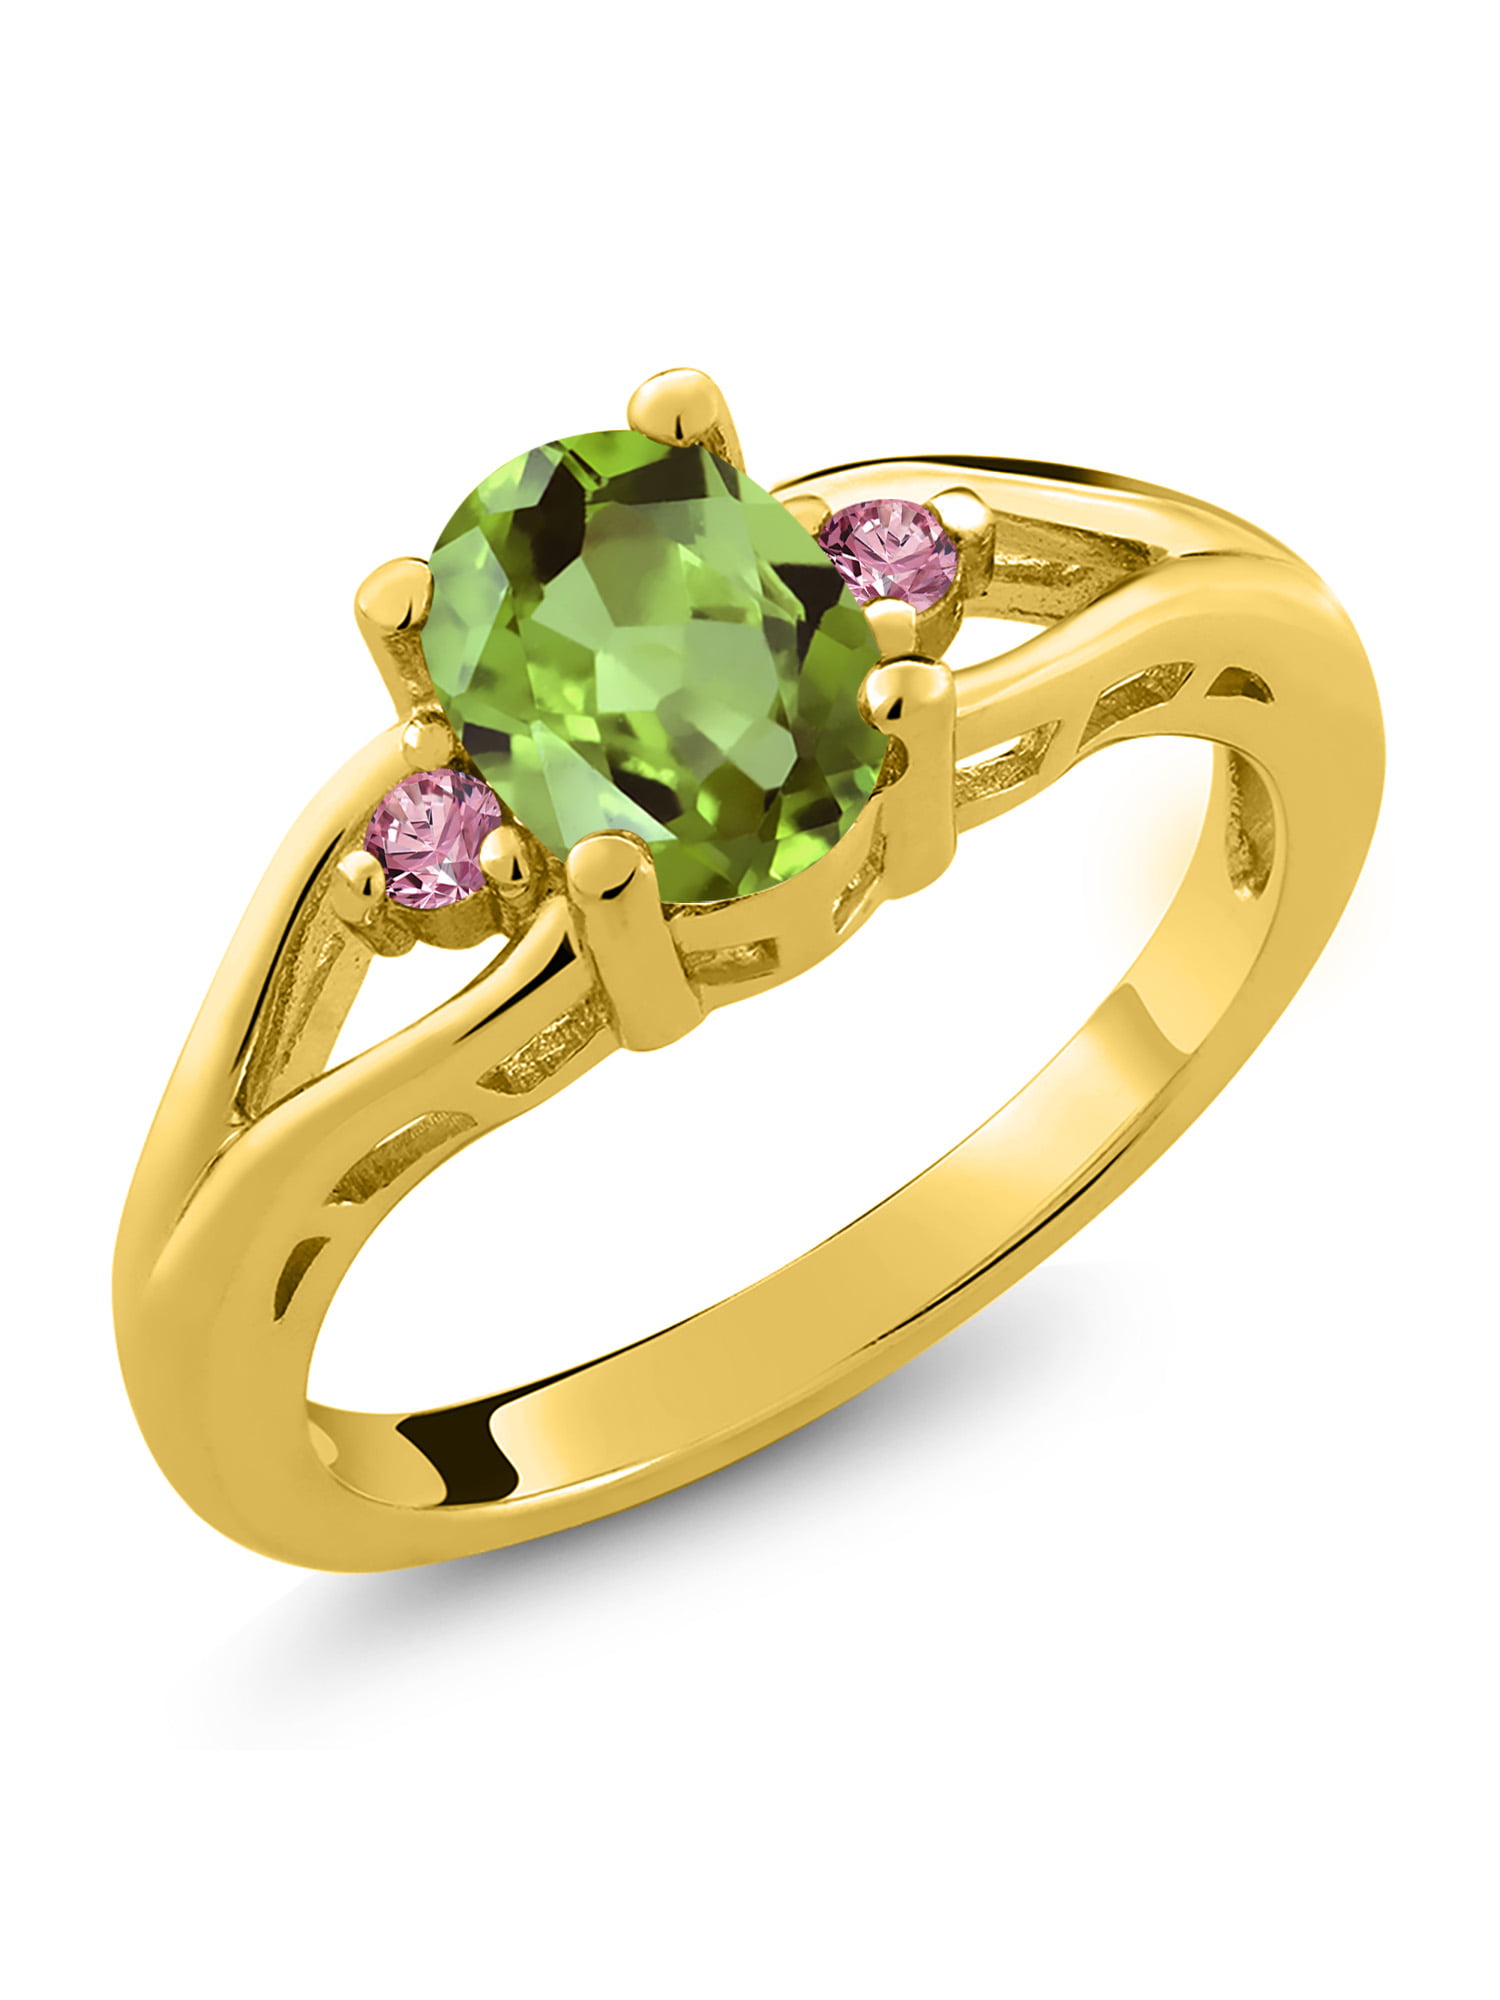 Details about   14k Yellow Gold Oval Peridot And Diamond Ring